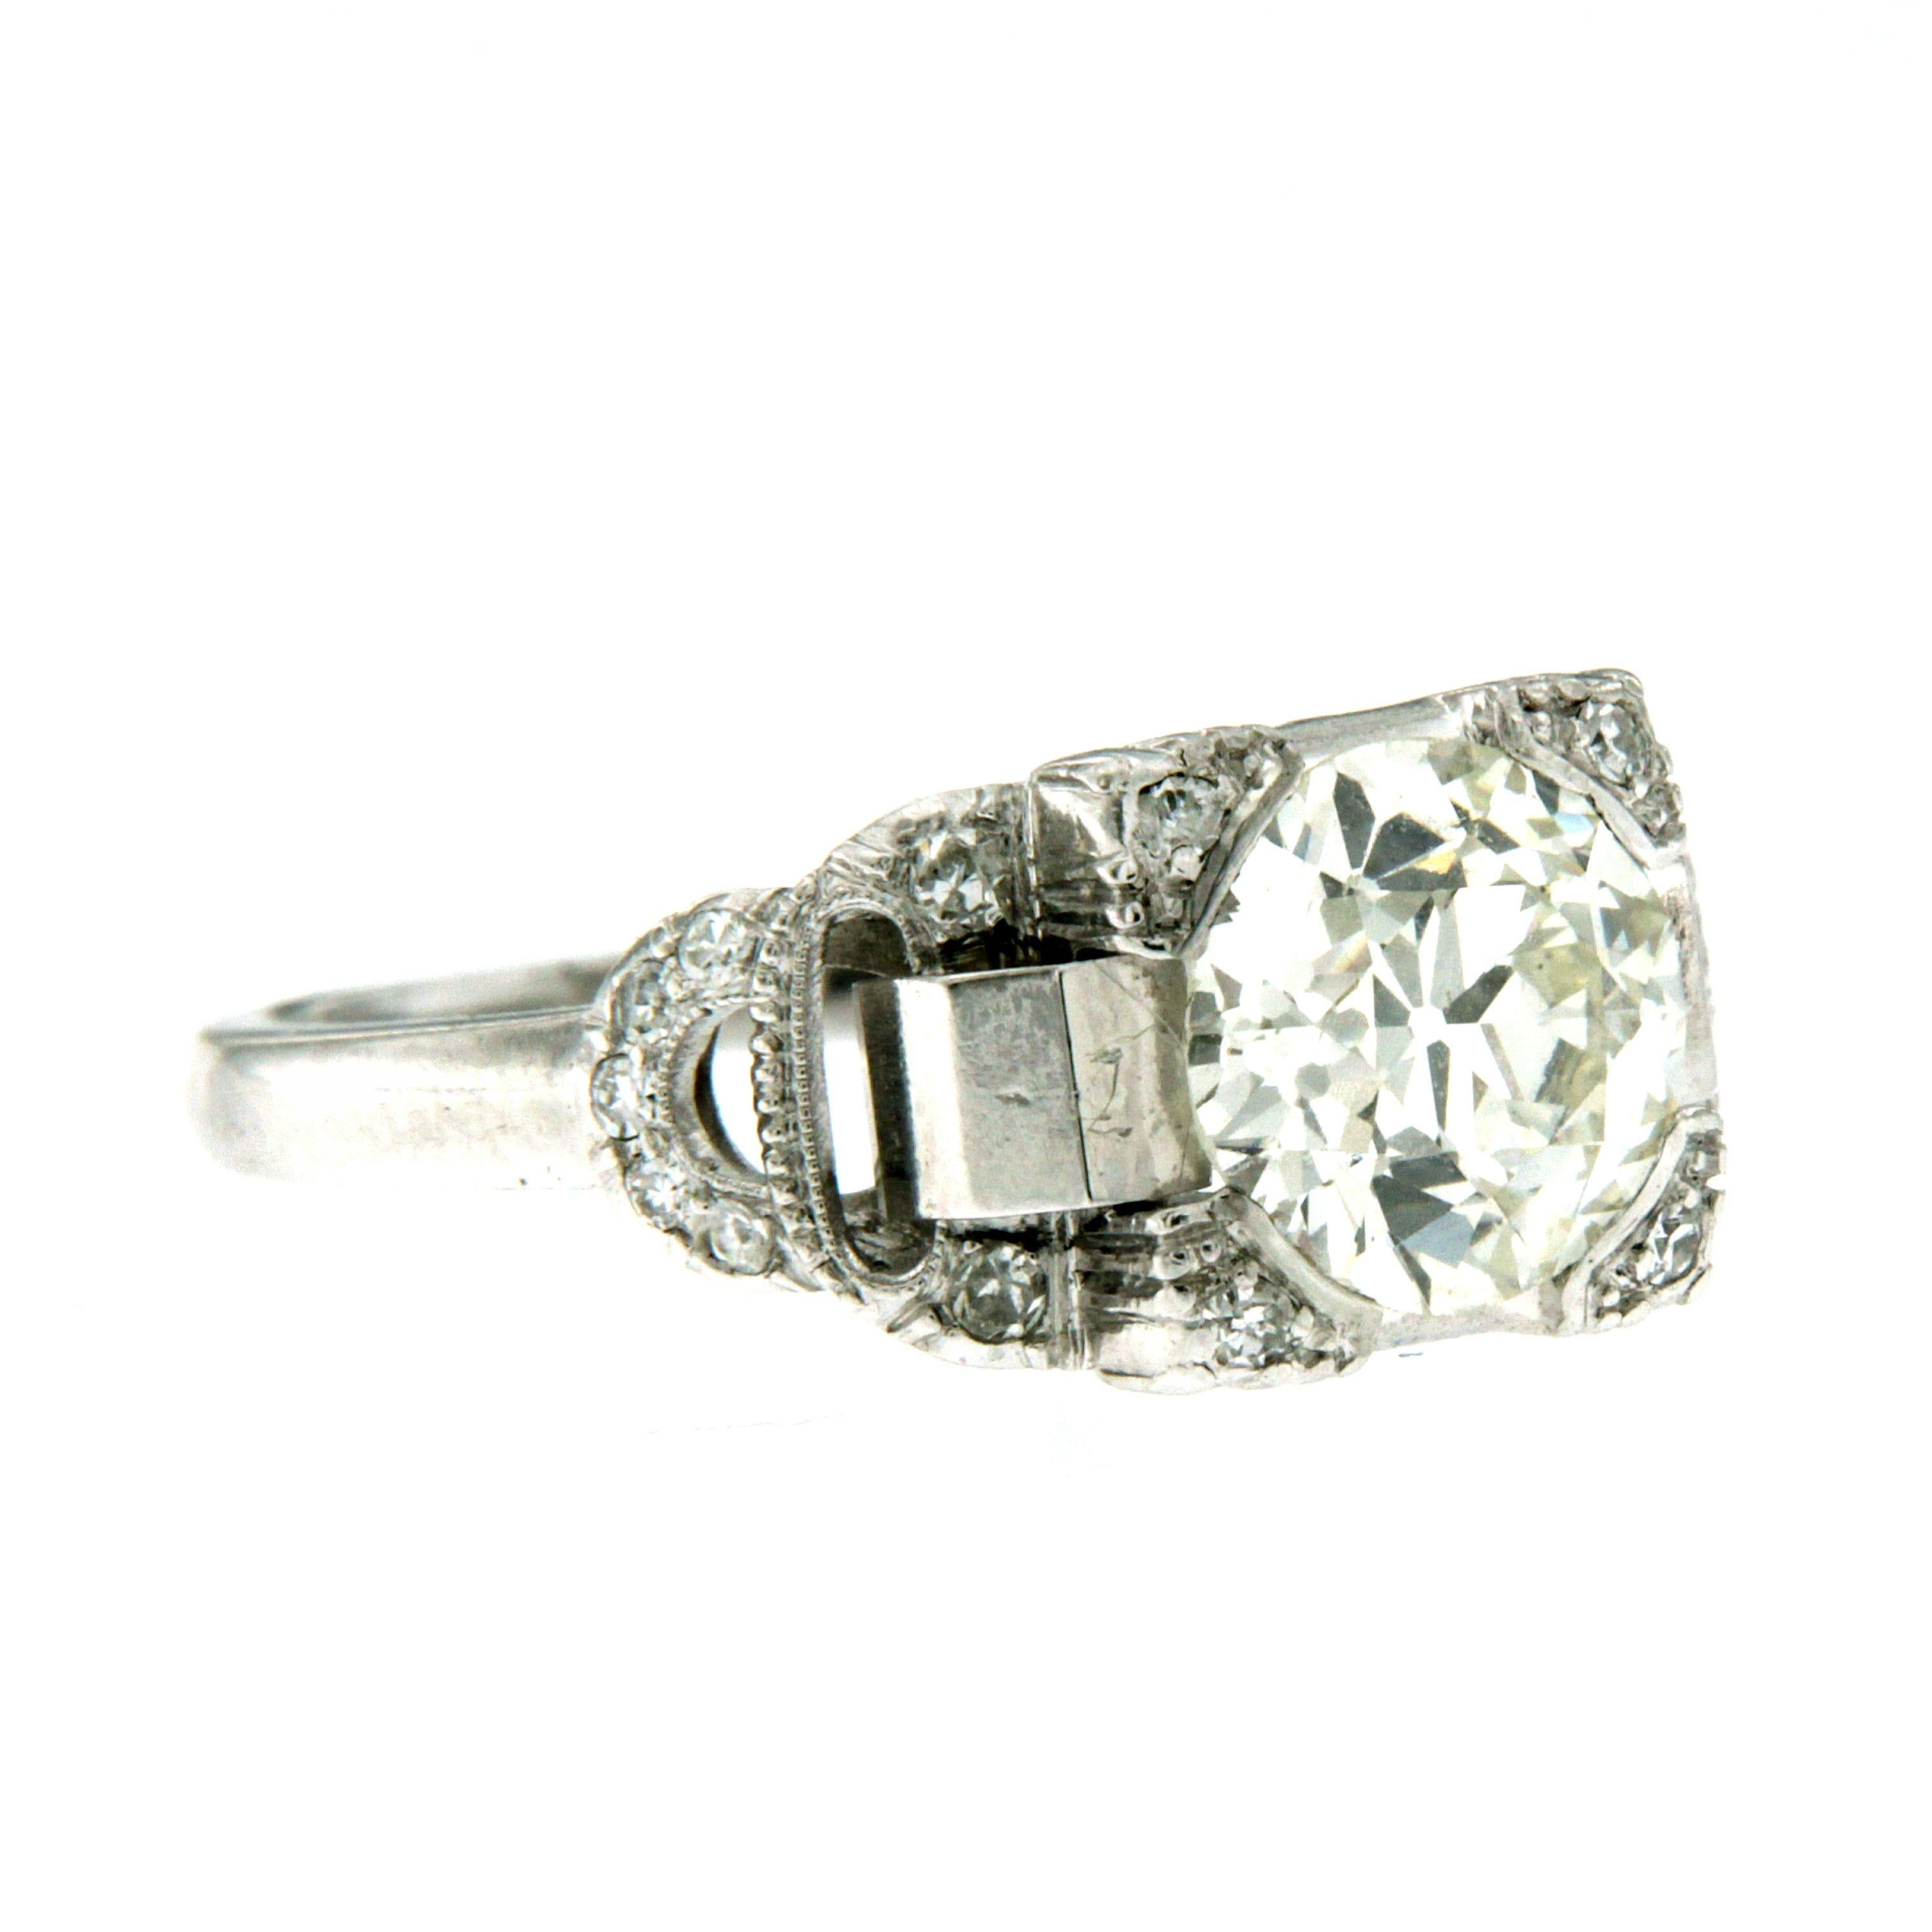 An exquisite example of Art Deco art, this ring hand-crafted in Platinum, authentic from 1920/1930, featuring in the center a sparkling 2.23 carats old mine-cut Diamond, more 0,15 carats on the setting.
The main stone is graded H/I vs1

The ring is